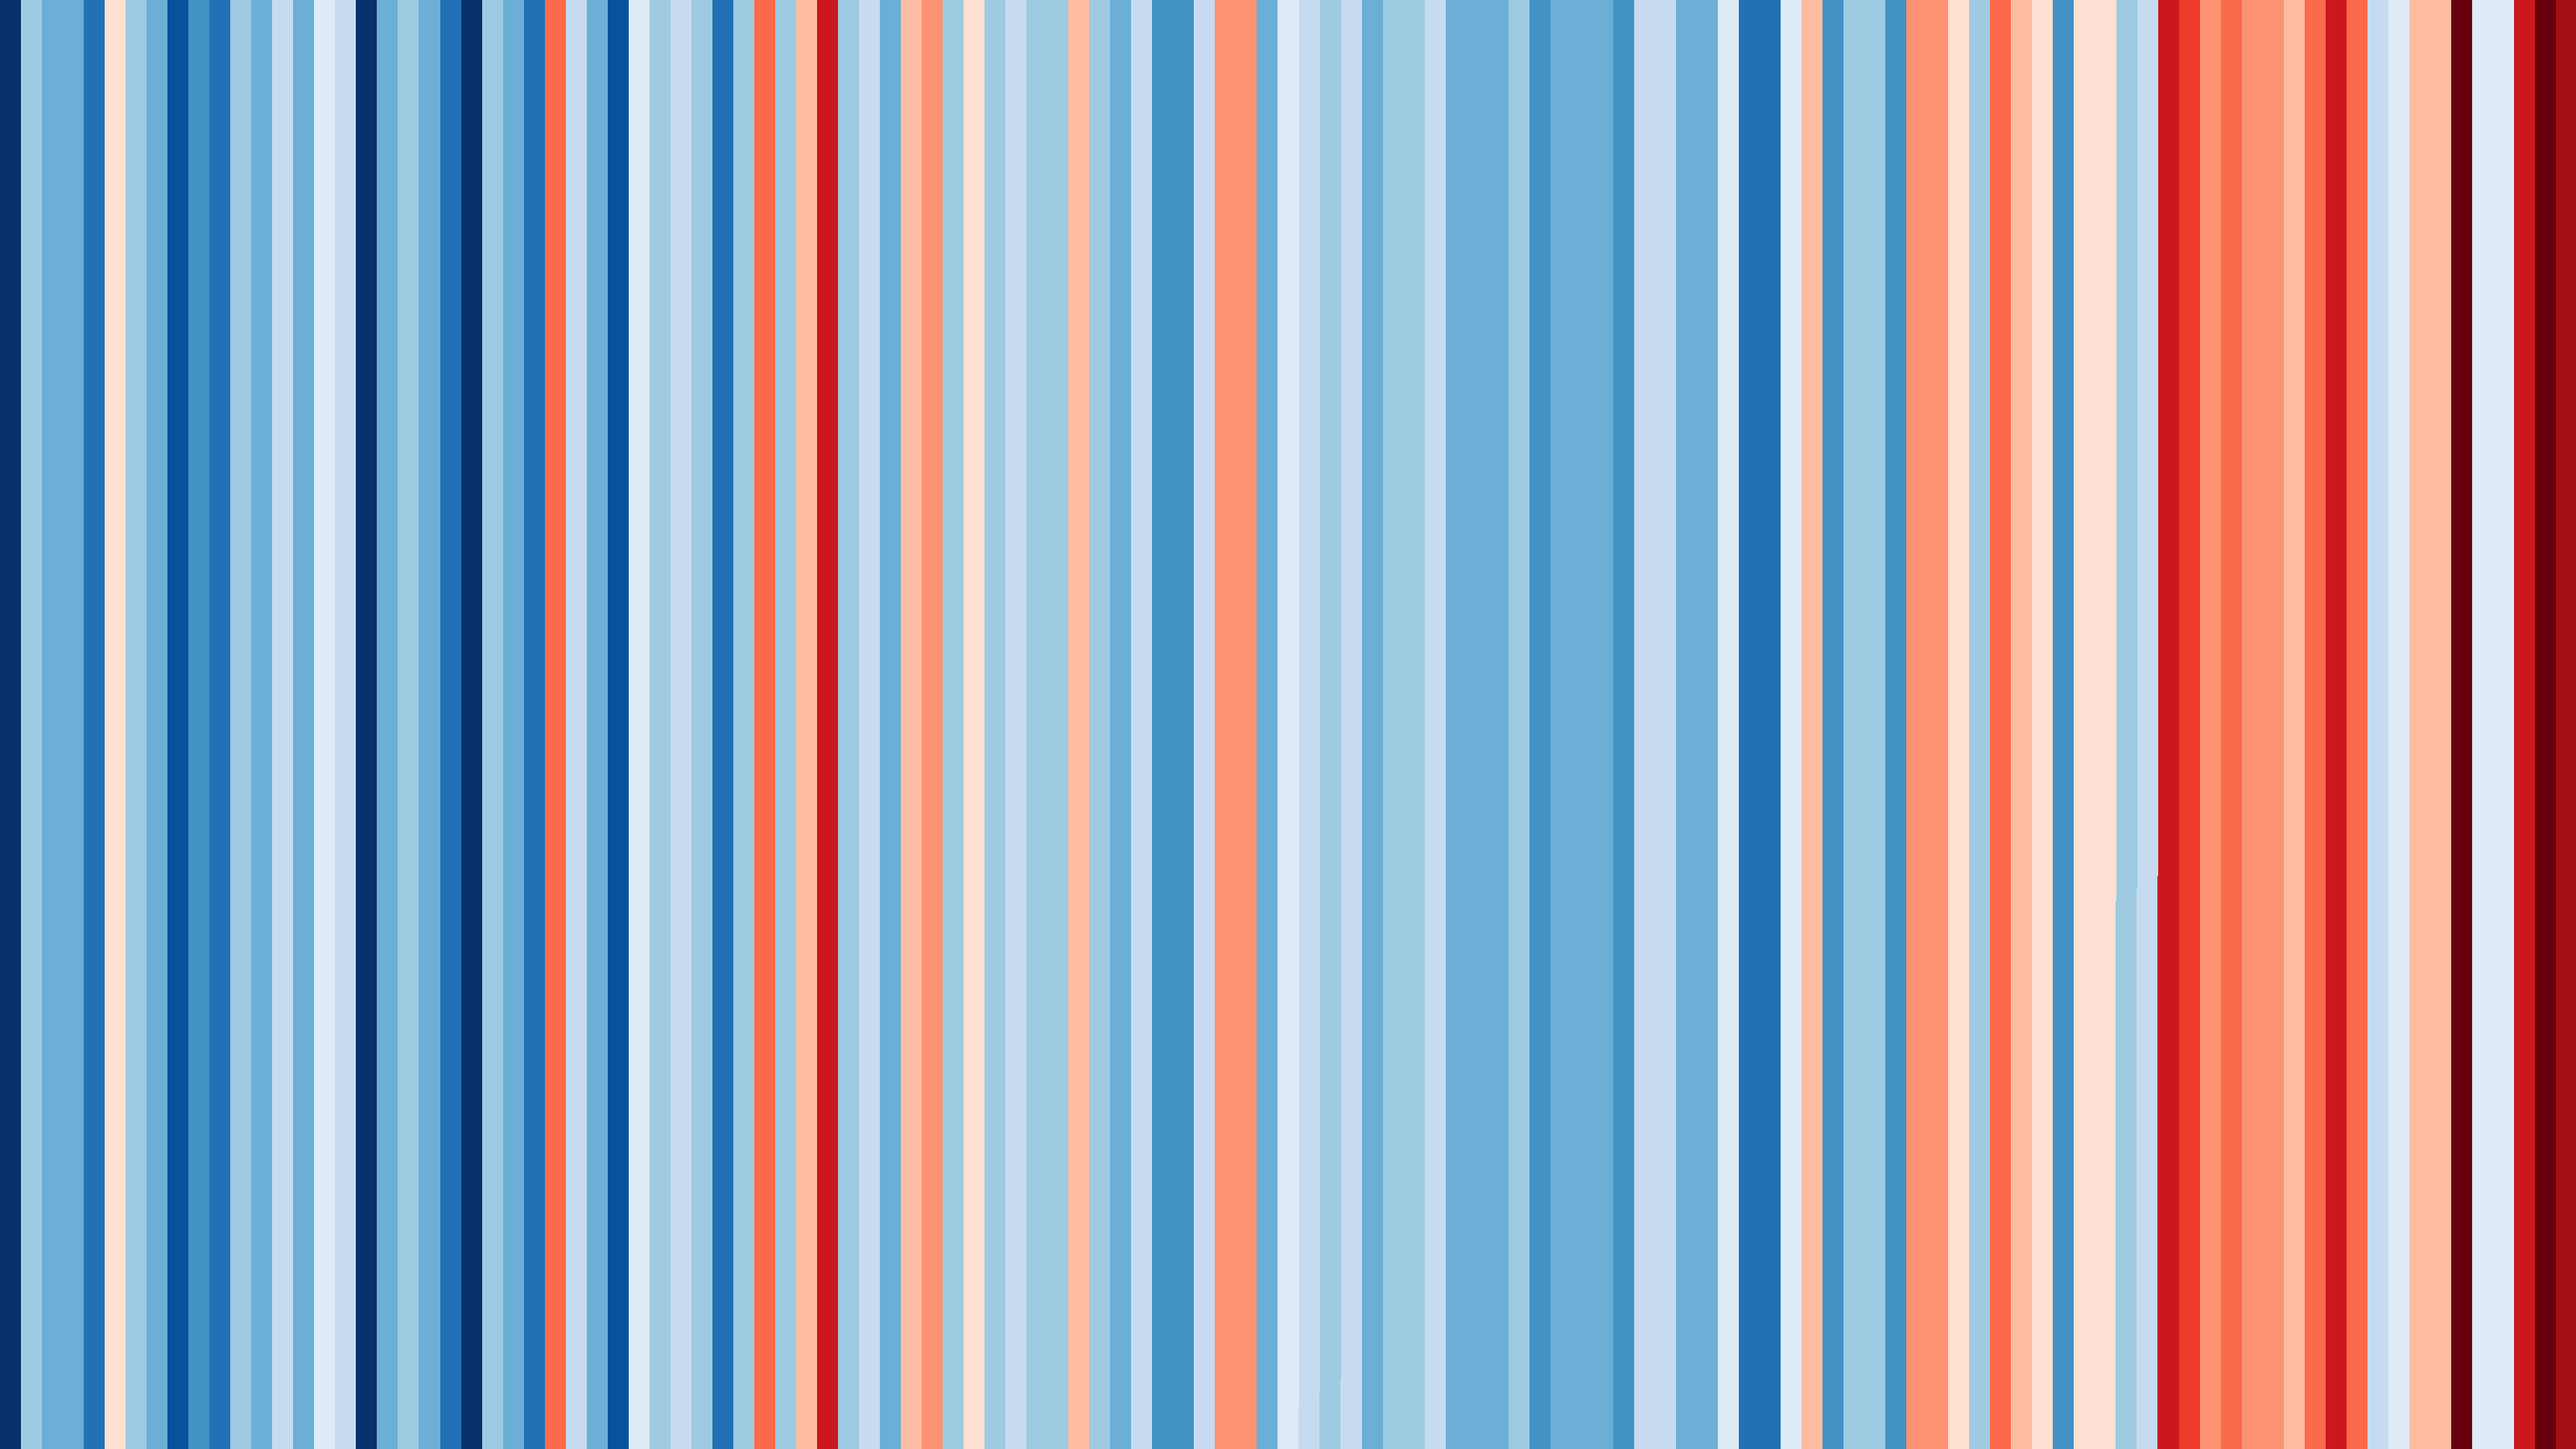 Annual temperatures for the contiguous United States from 1895 to 2017. The color scale goes from 50.2°F (dark blue) to 55.0°F (dark red).